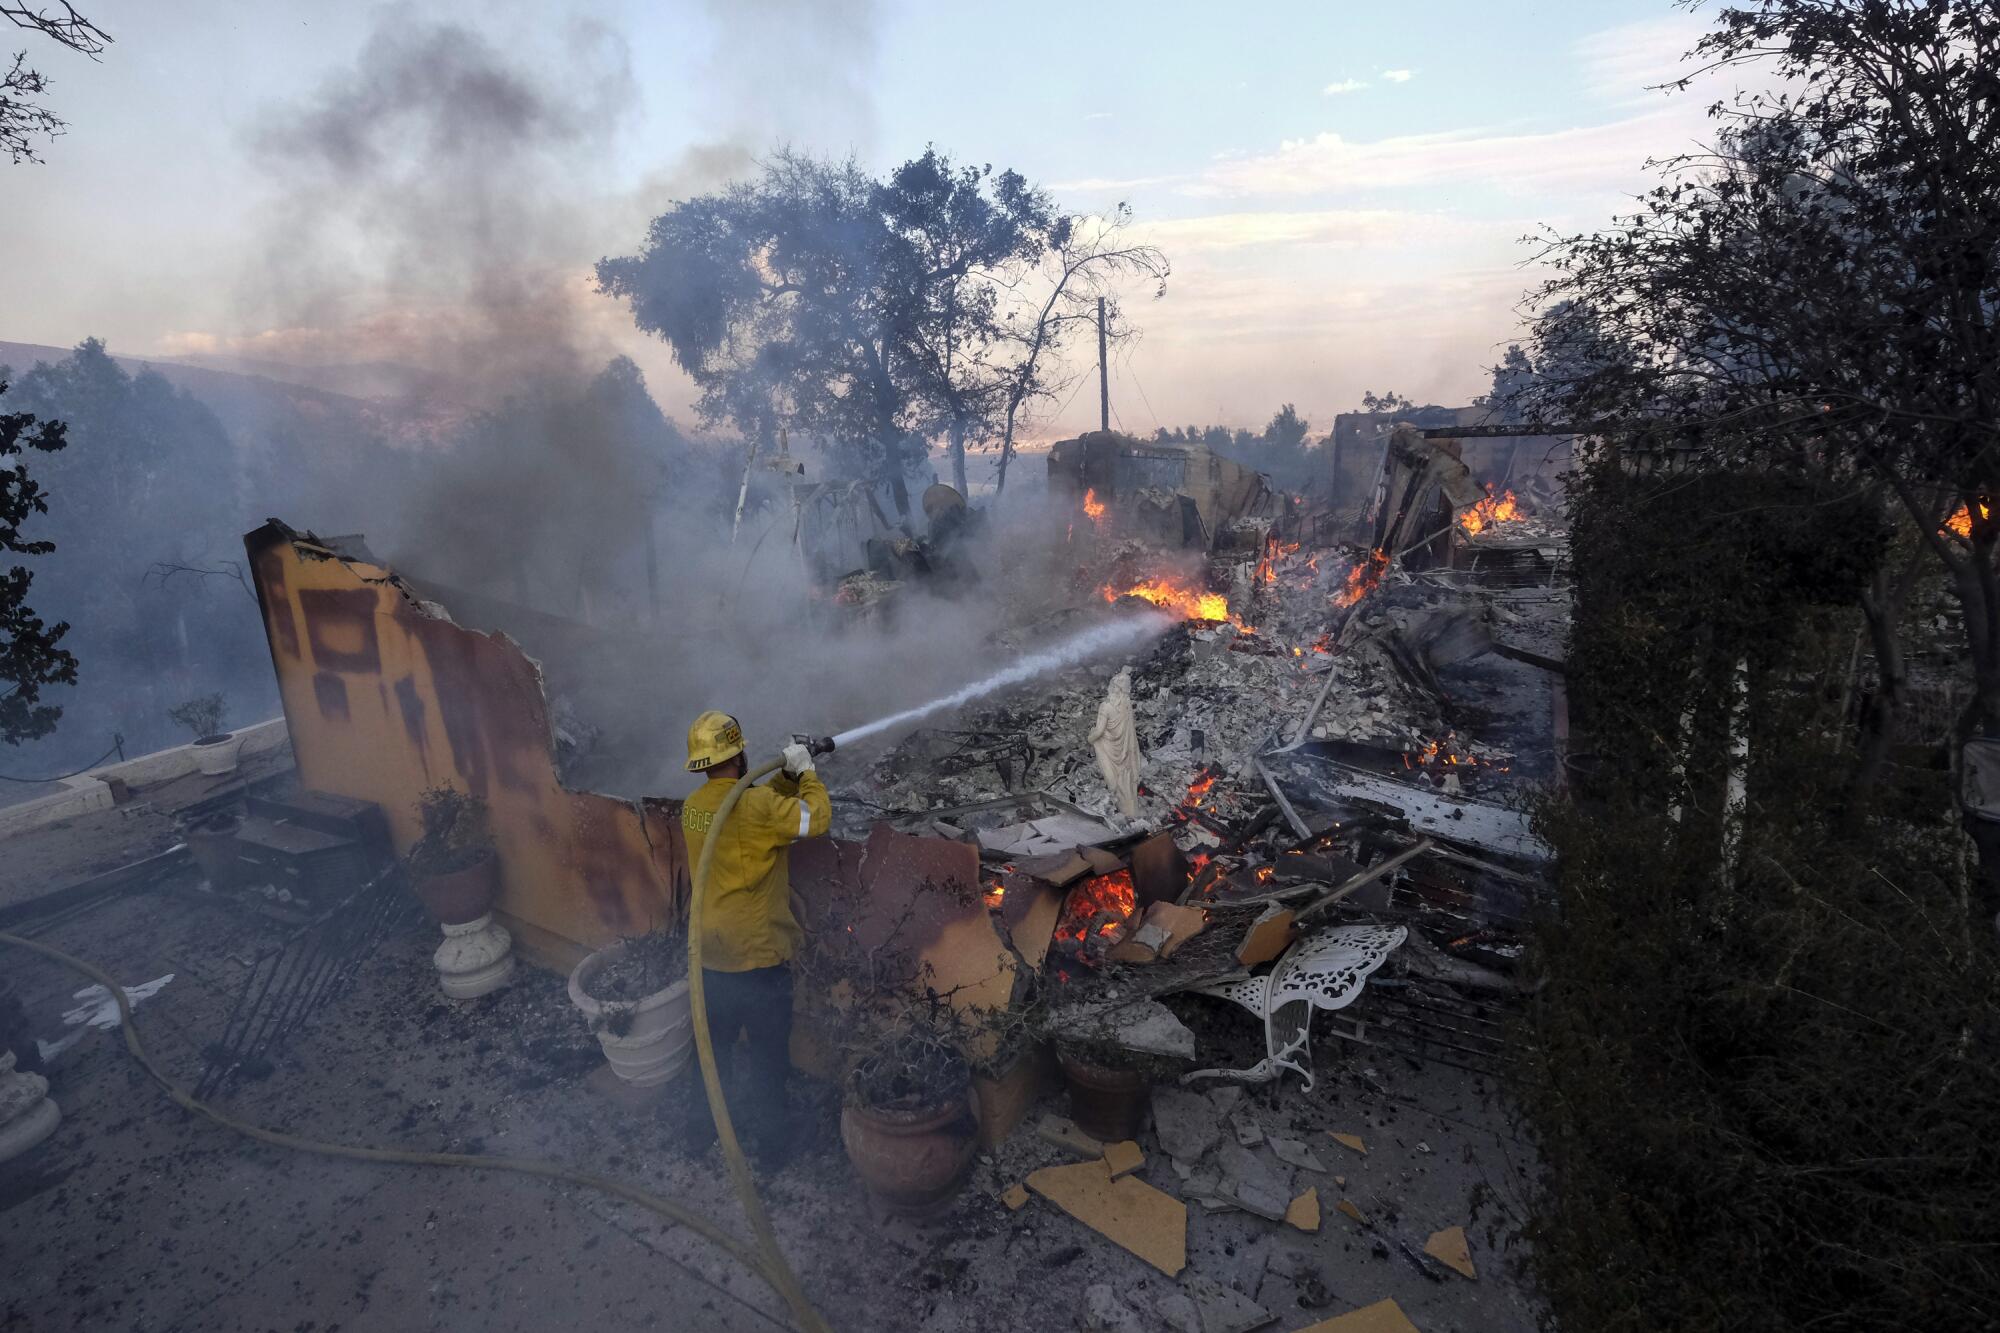 A firefighter aims his hose at flames burning inside a house destroyed by the South fire